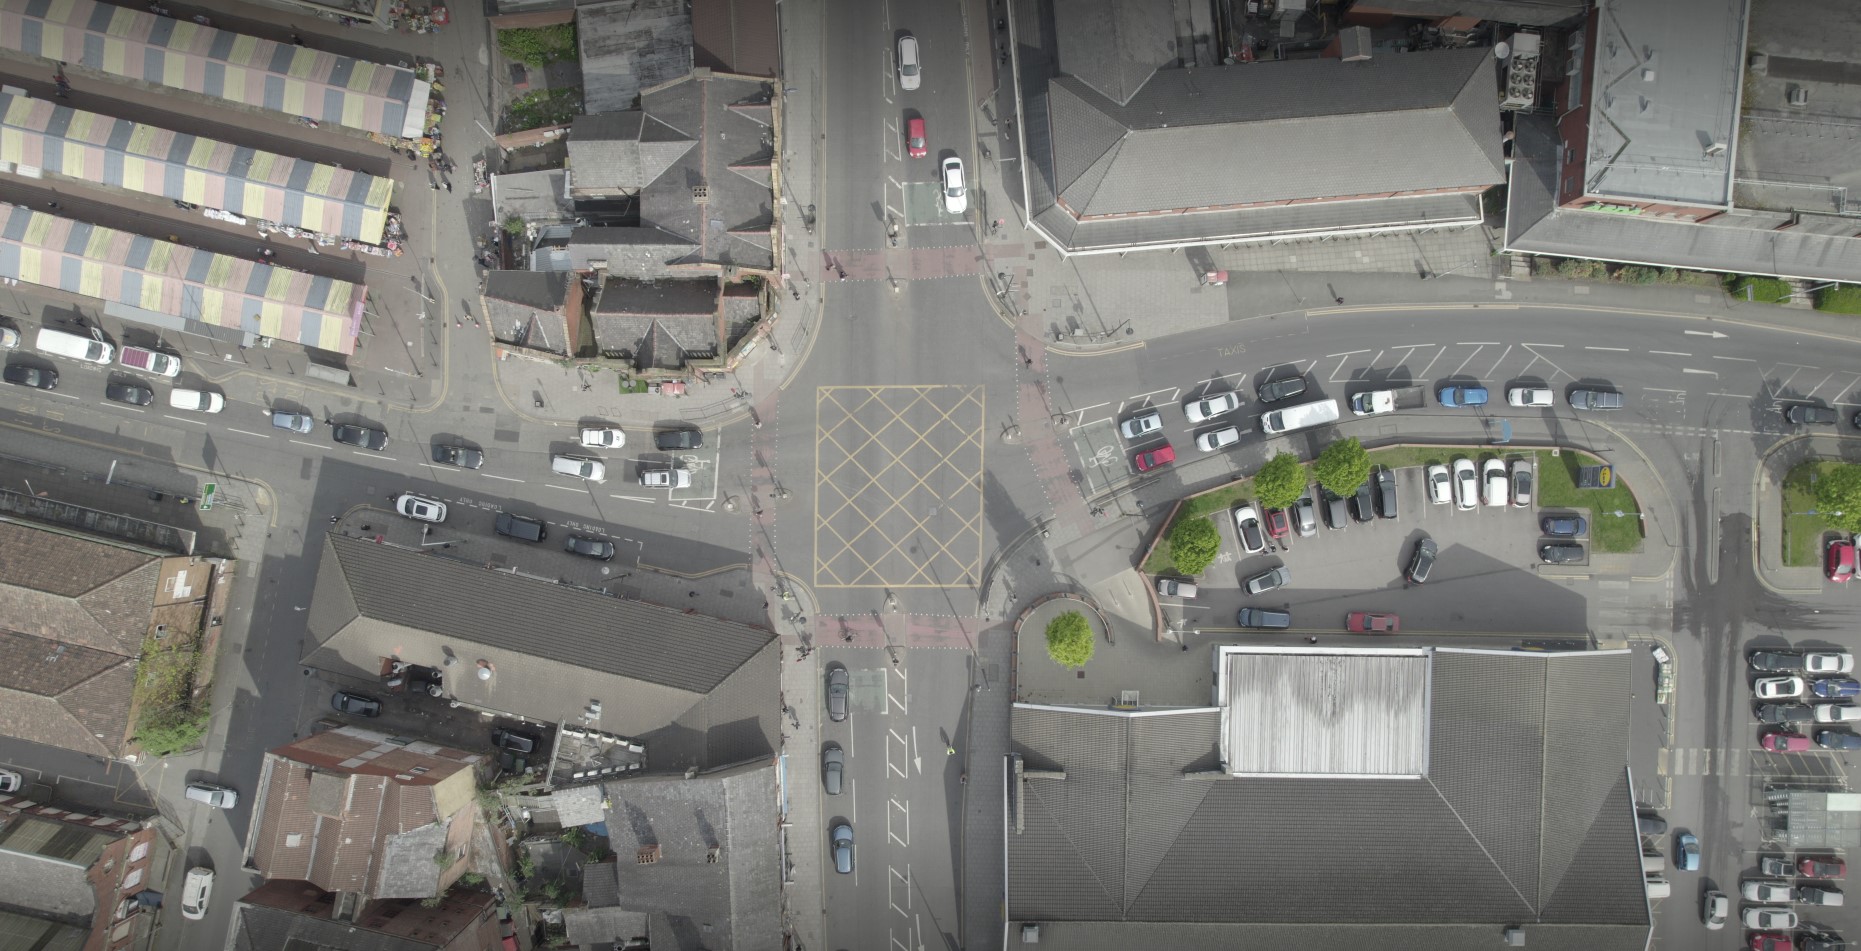 Birdseye view image of queuing traffic at the Stockport Road junction.